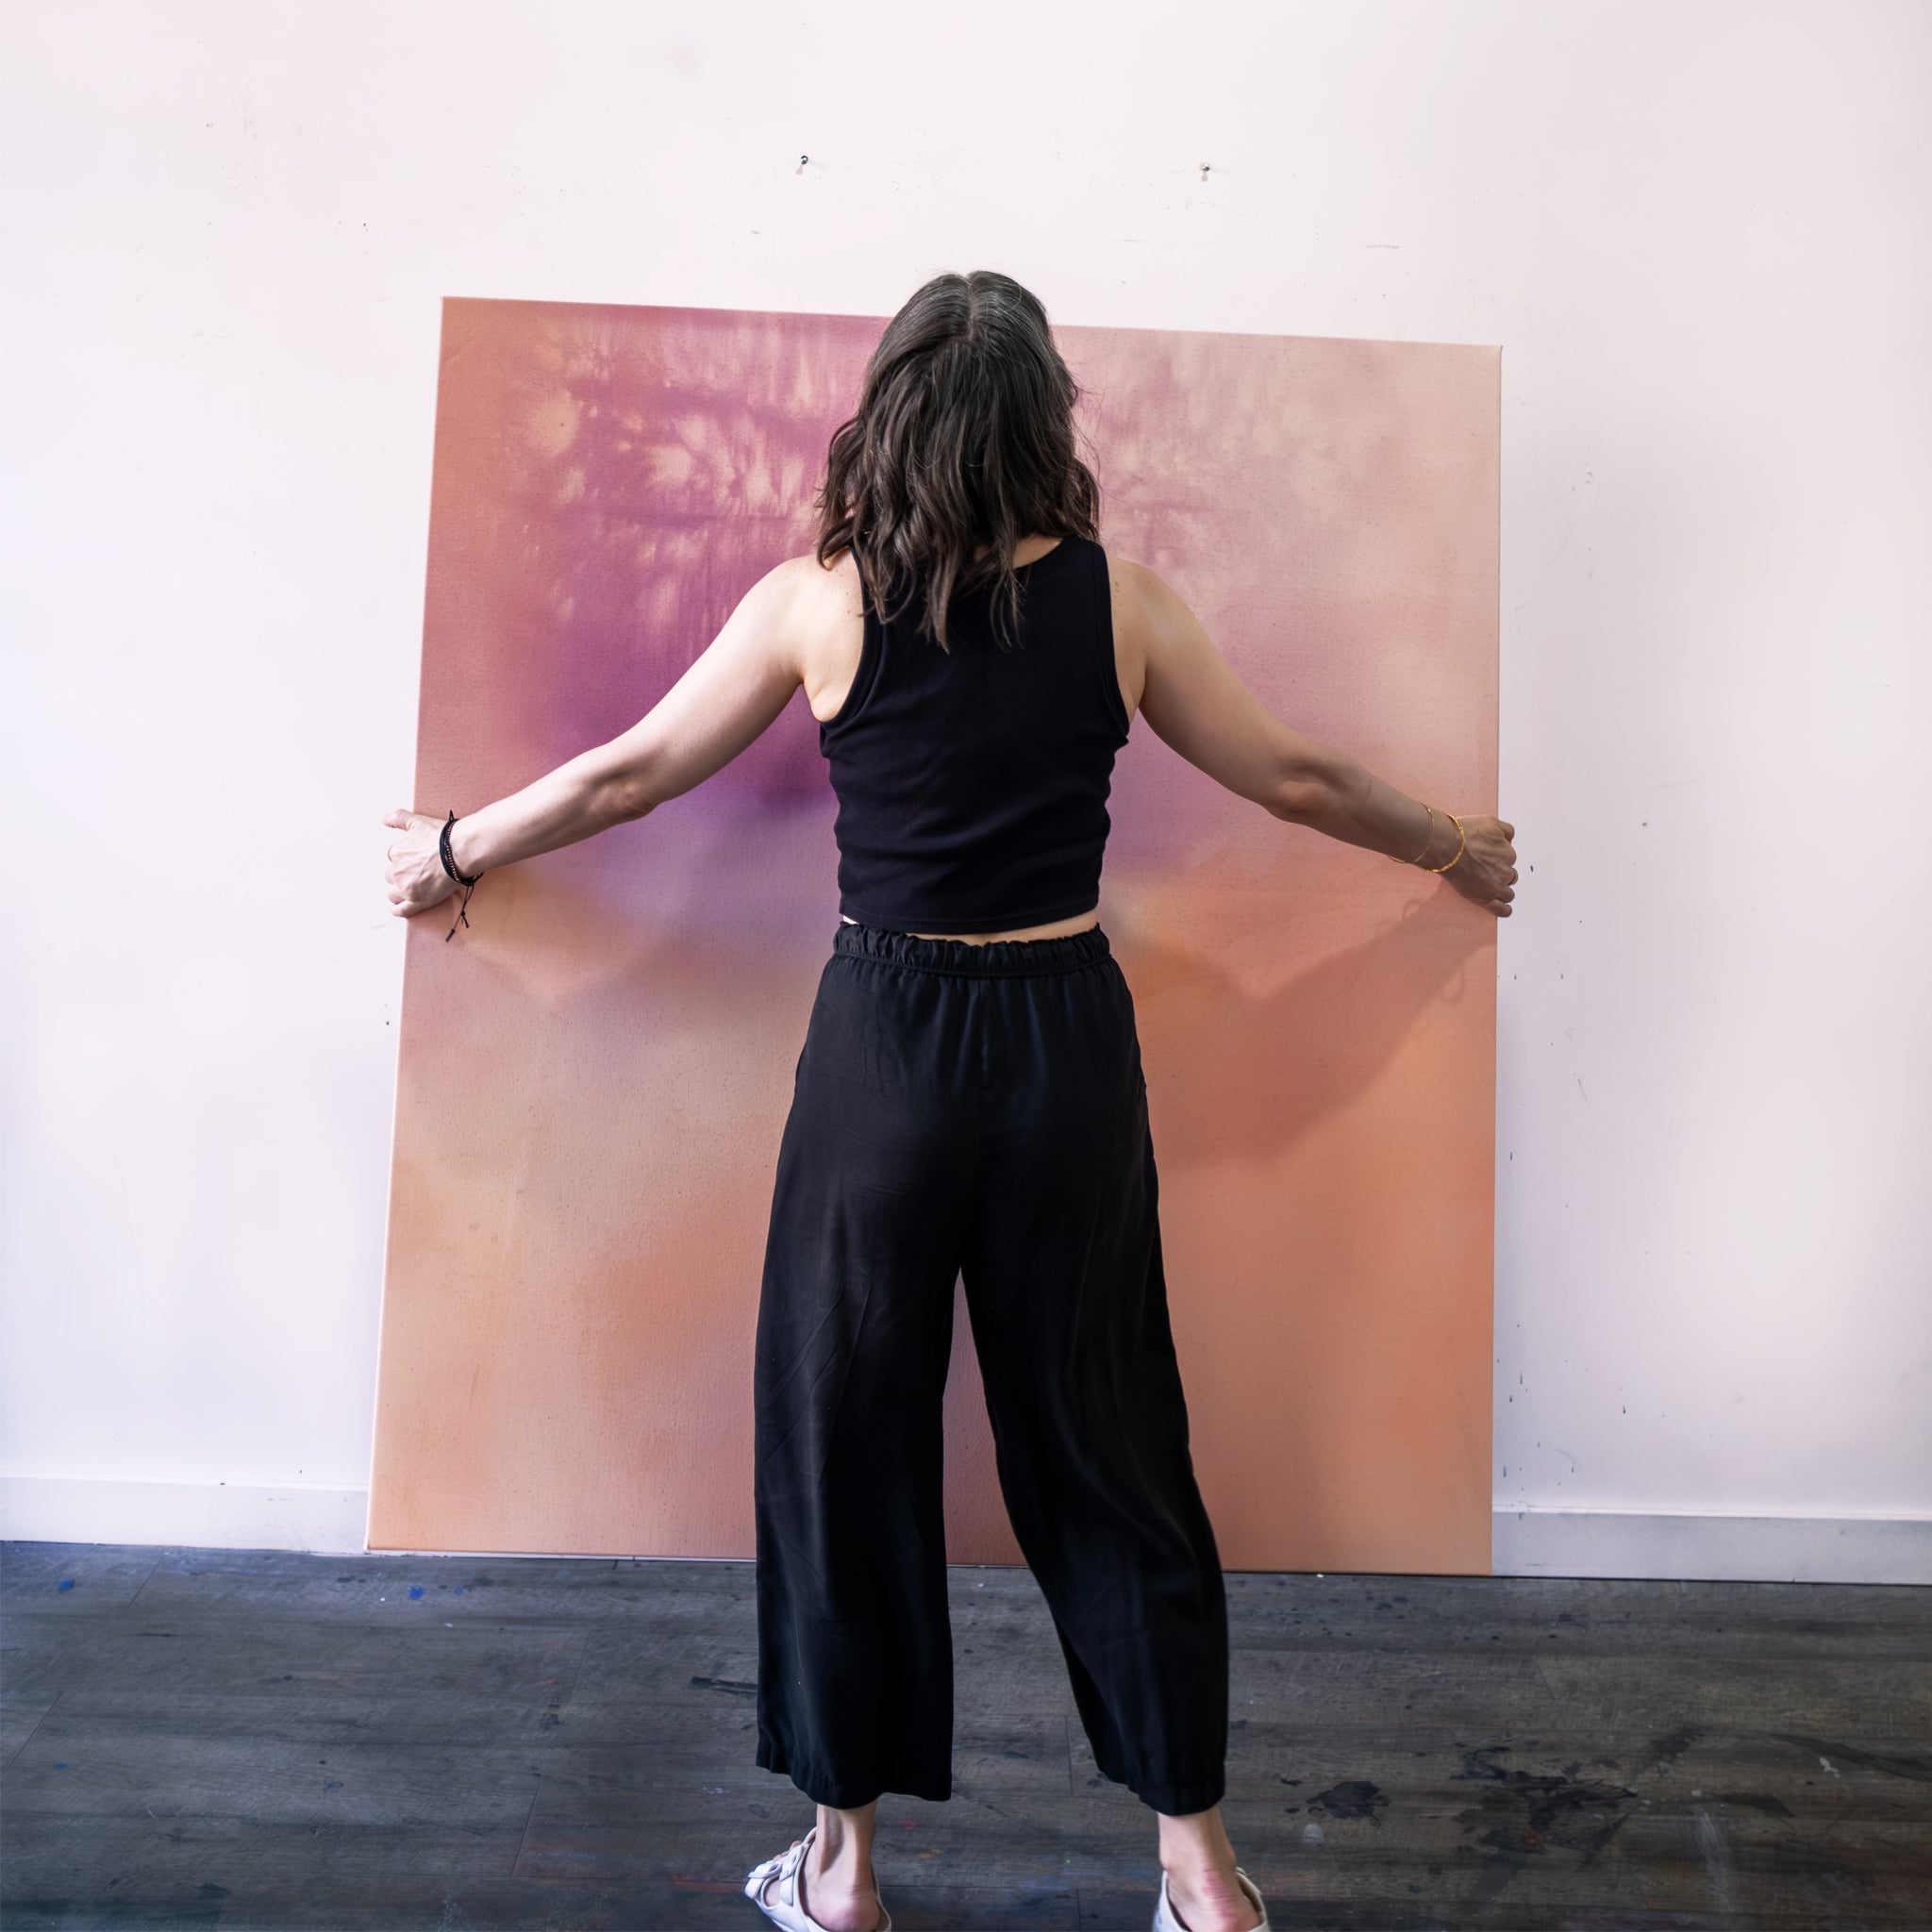 The artist stands with her back towards us. She is holding a large canvas from her Slow Burn series and is about to hang it on the wall.